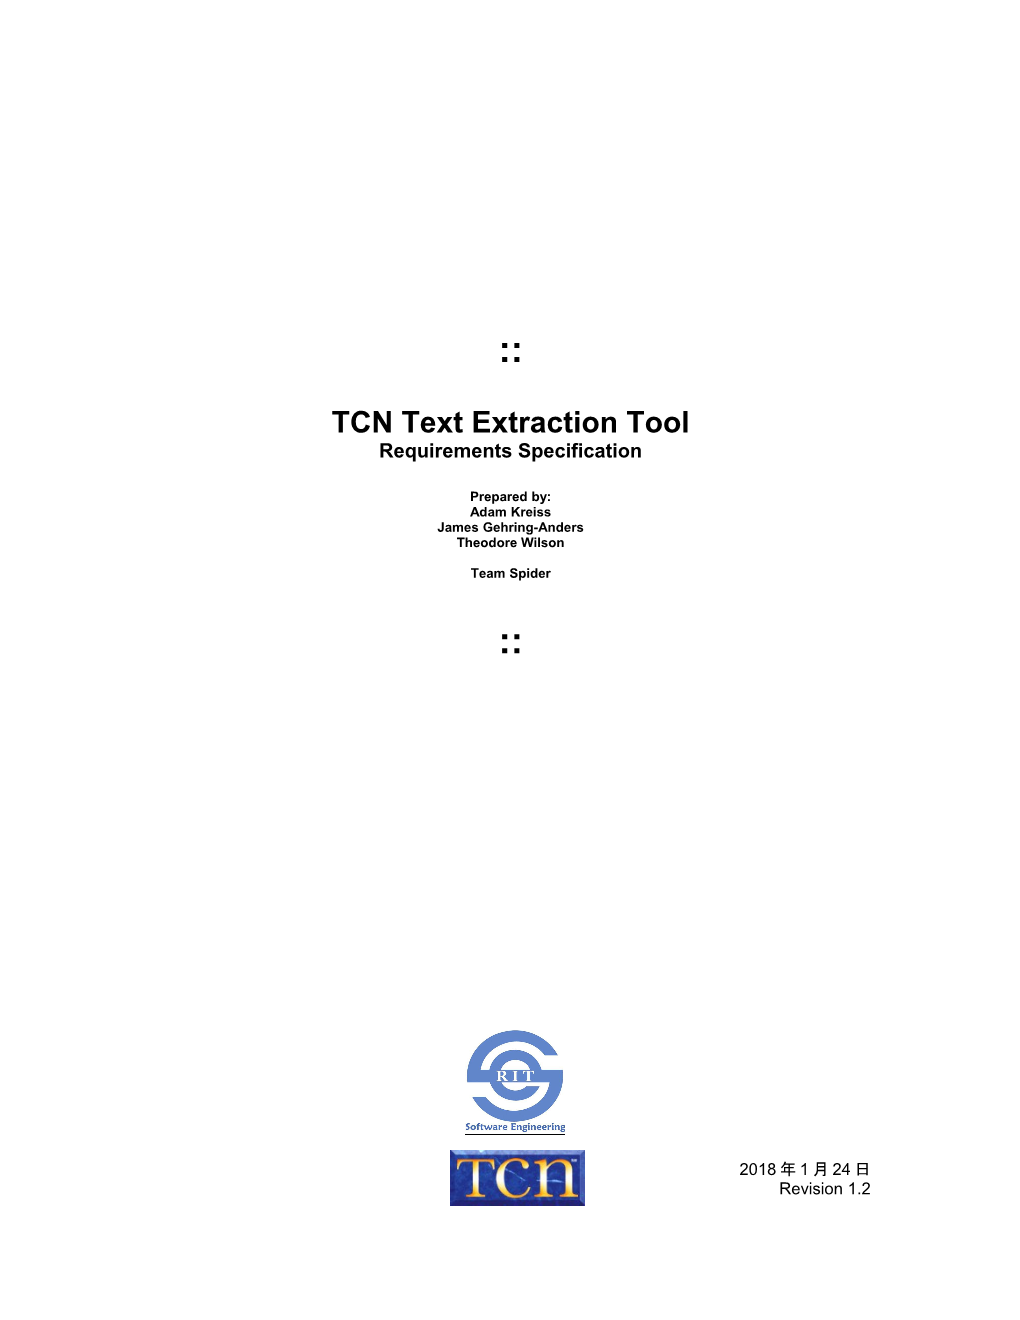 TCN Text Extraction Tool